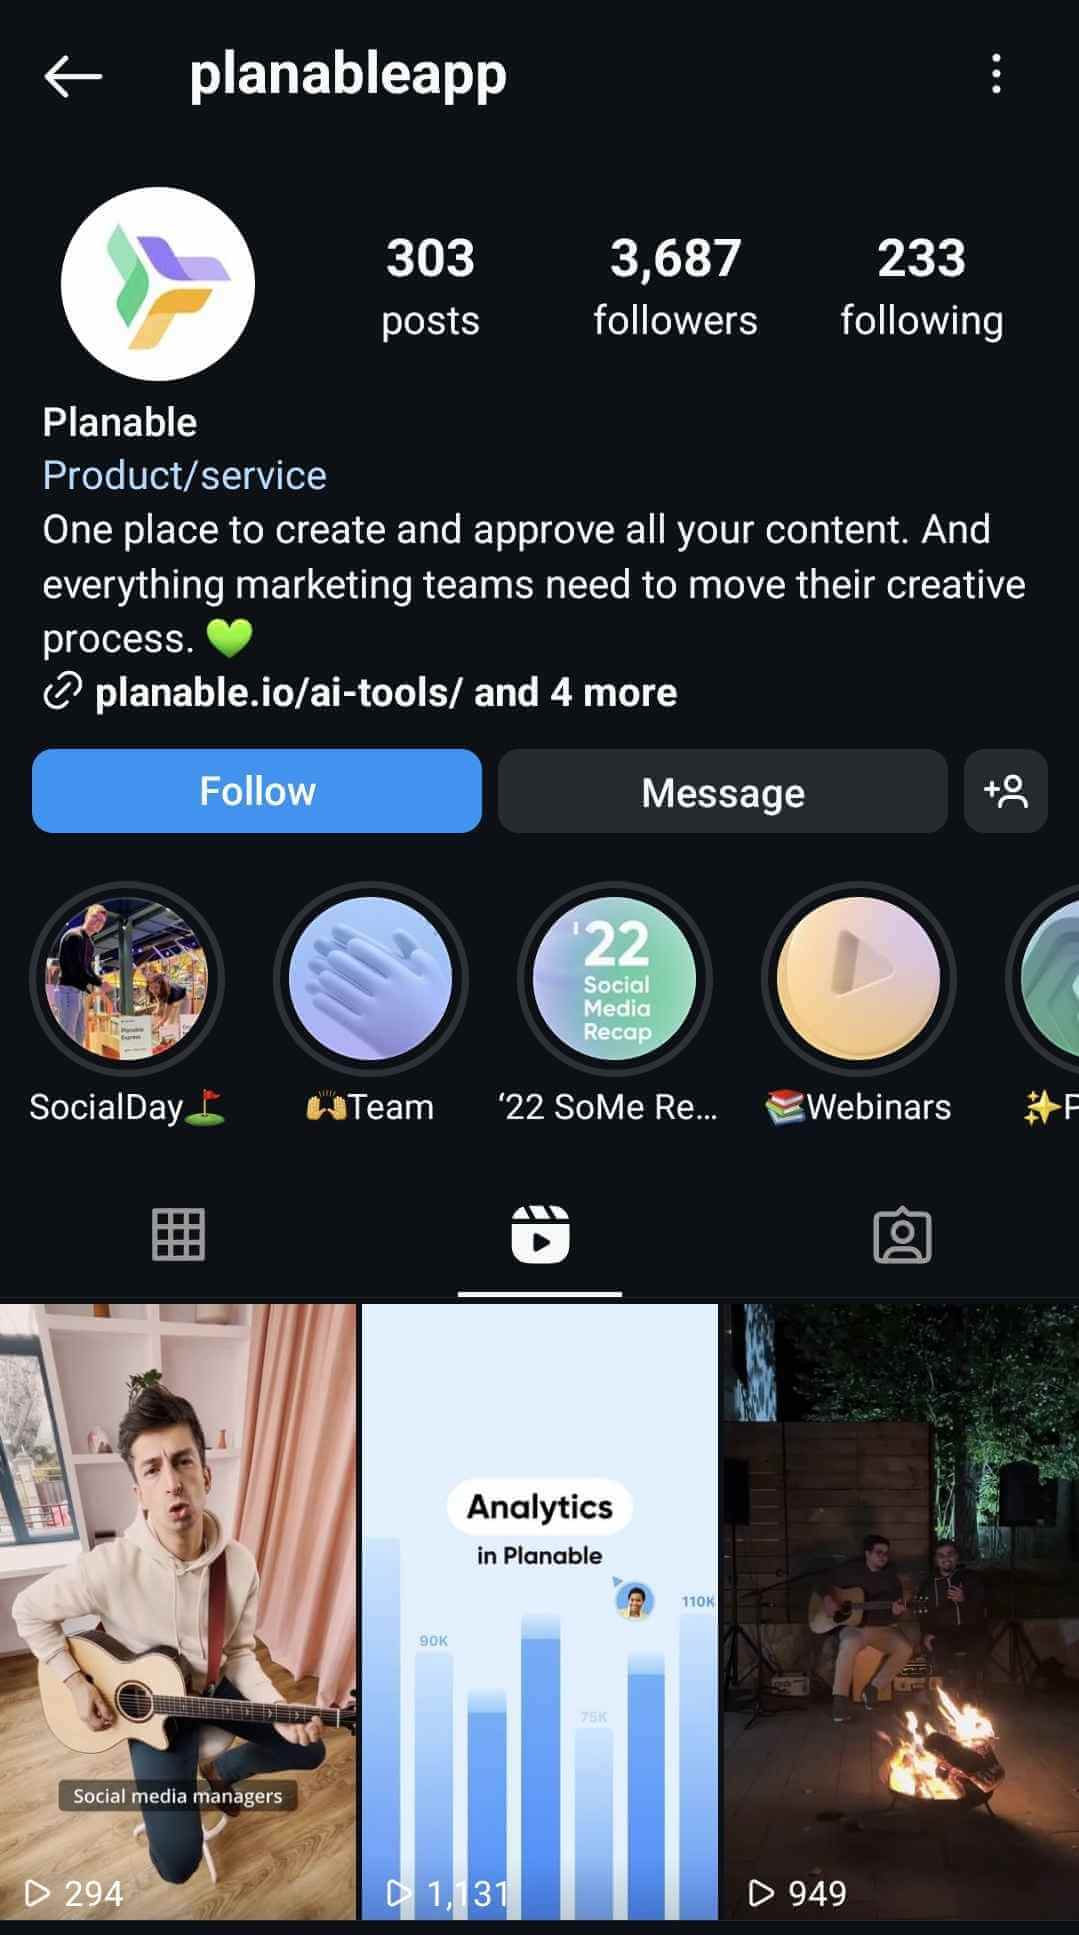 Instagram profile of Planable showing 303 posts, 3,687 followers, and 233 following, with highlights on content management and analytics tools.